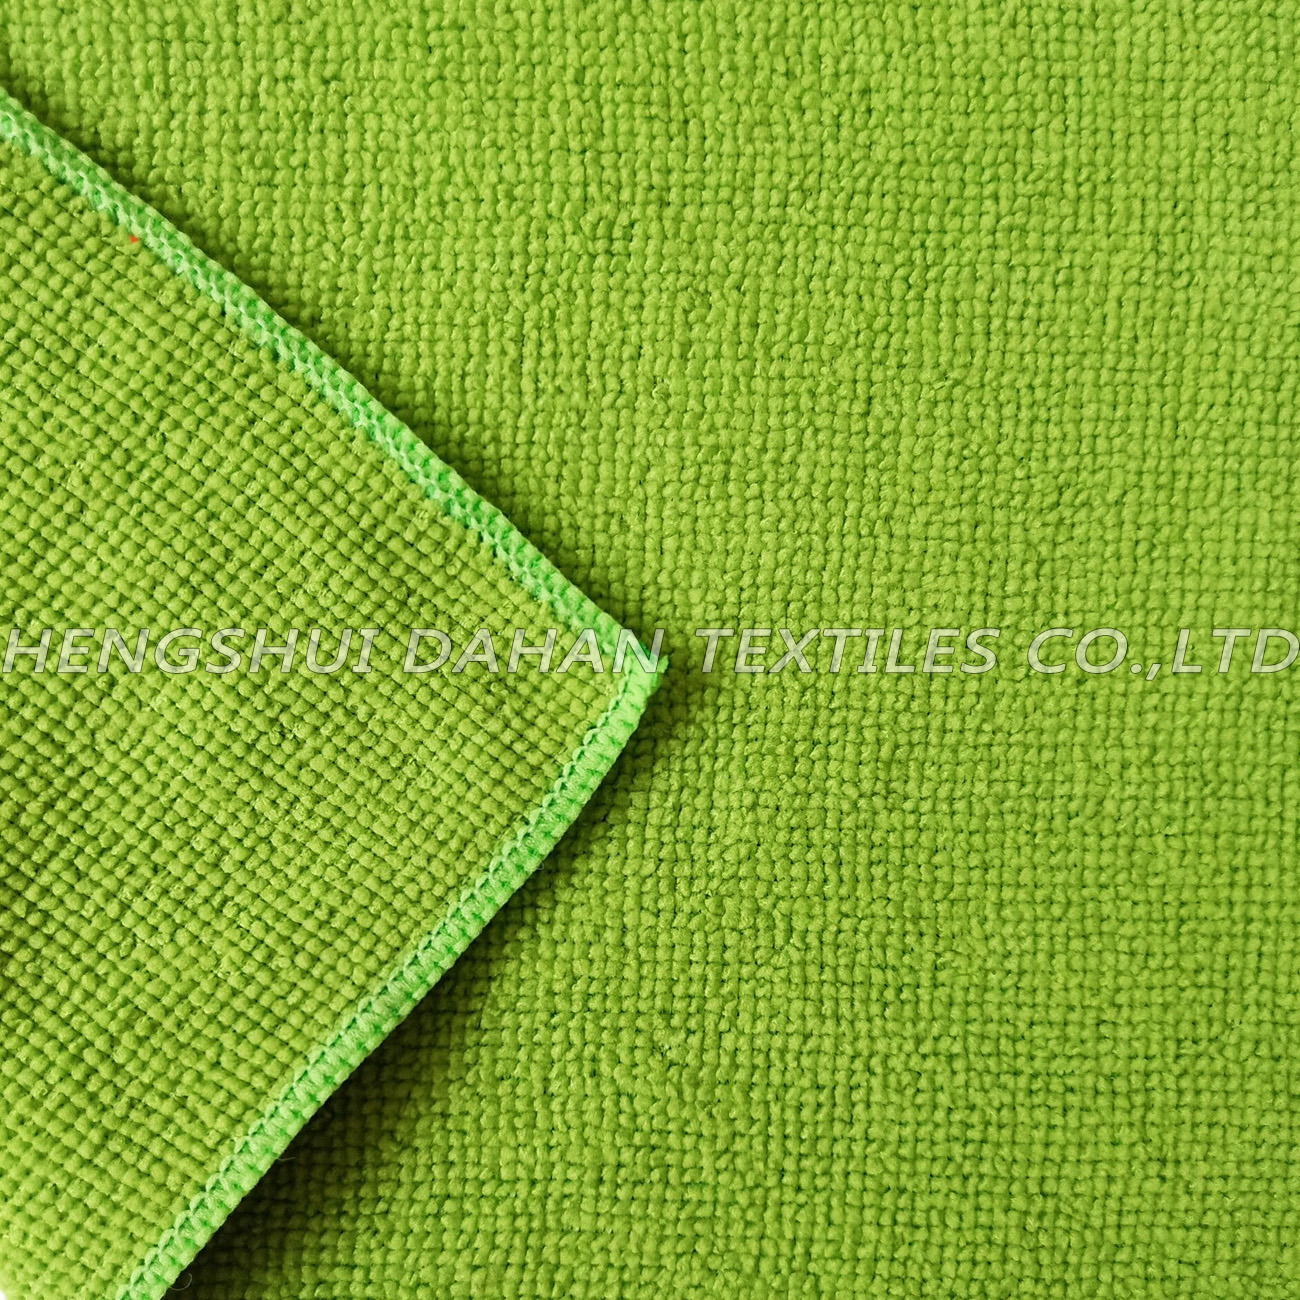 MT53 colorful microfiber cleaning towel 